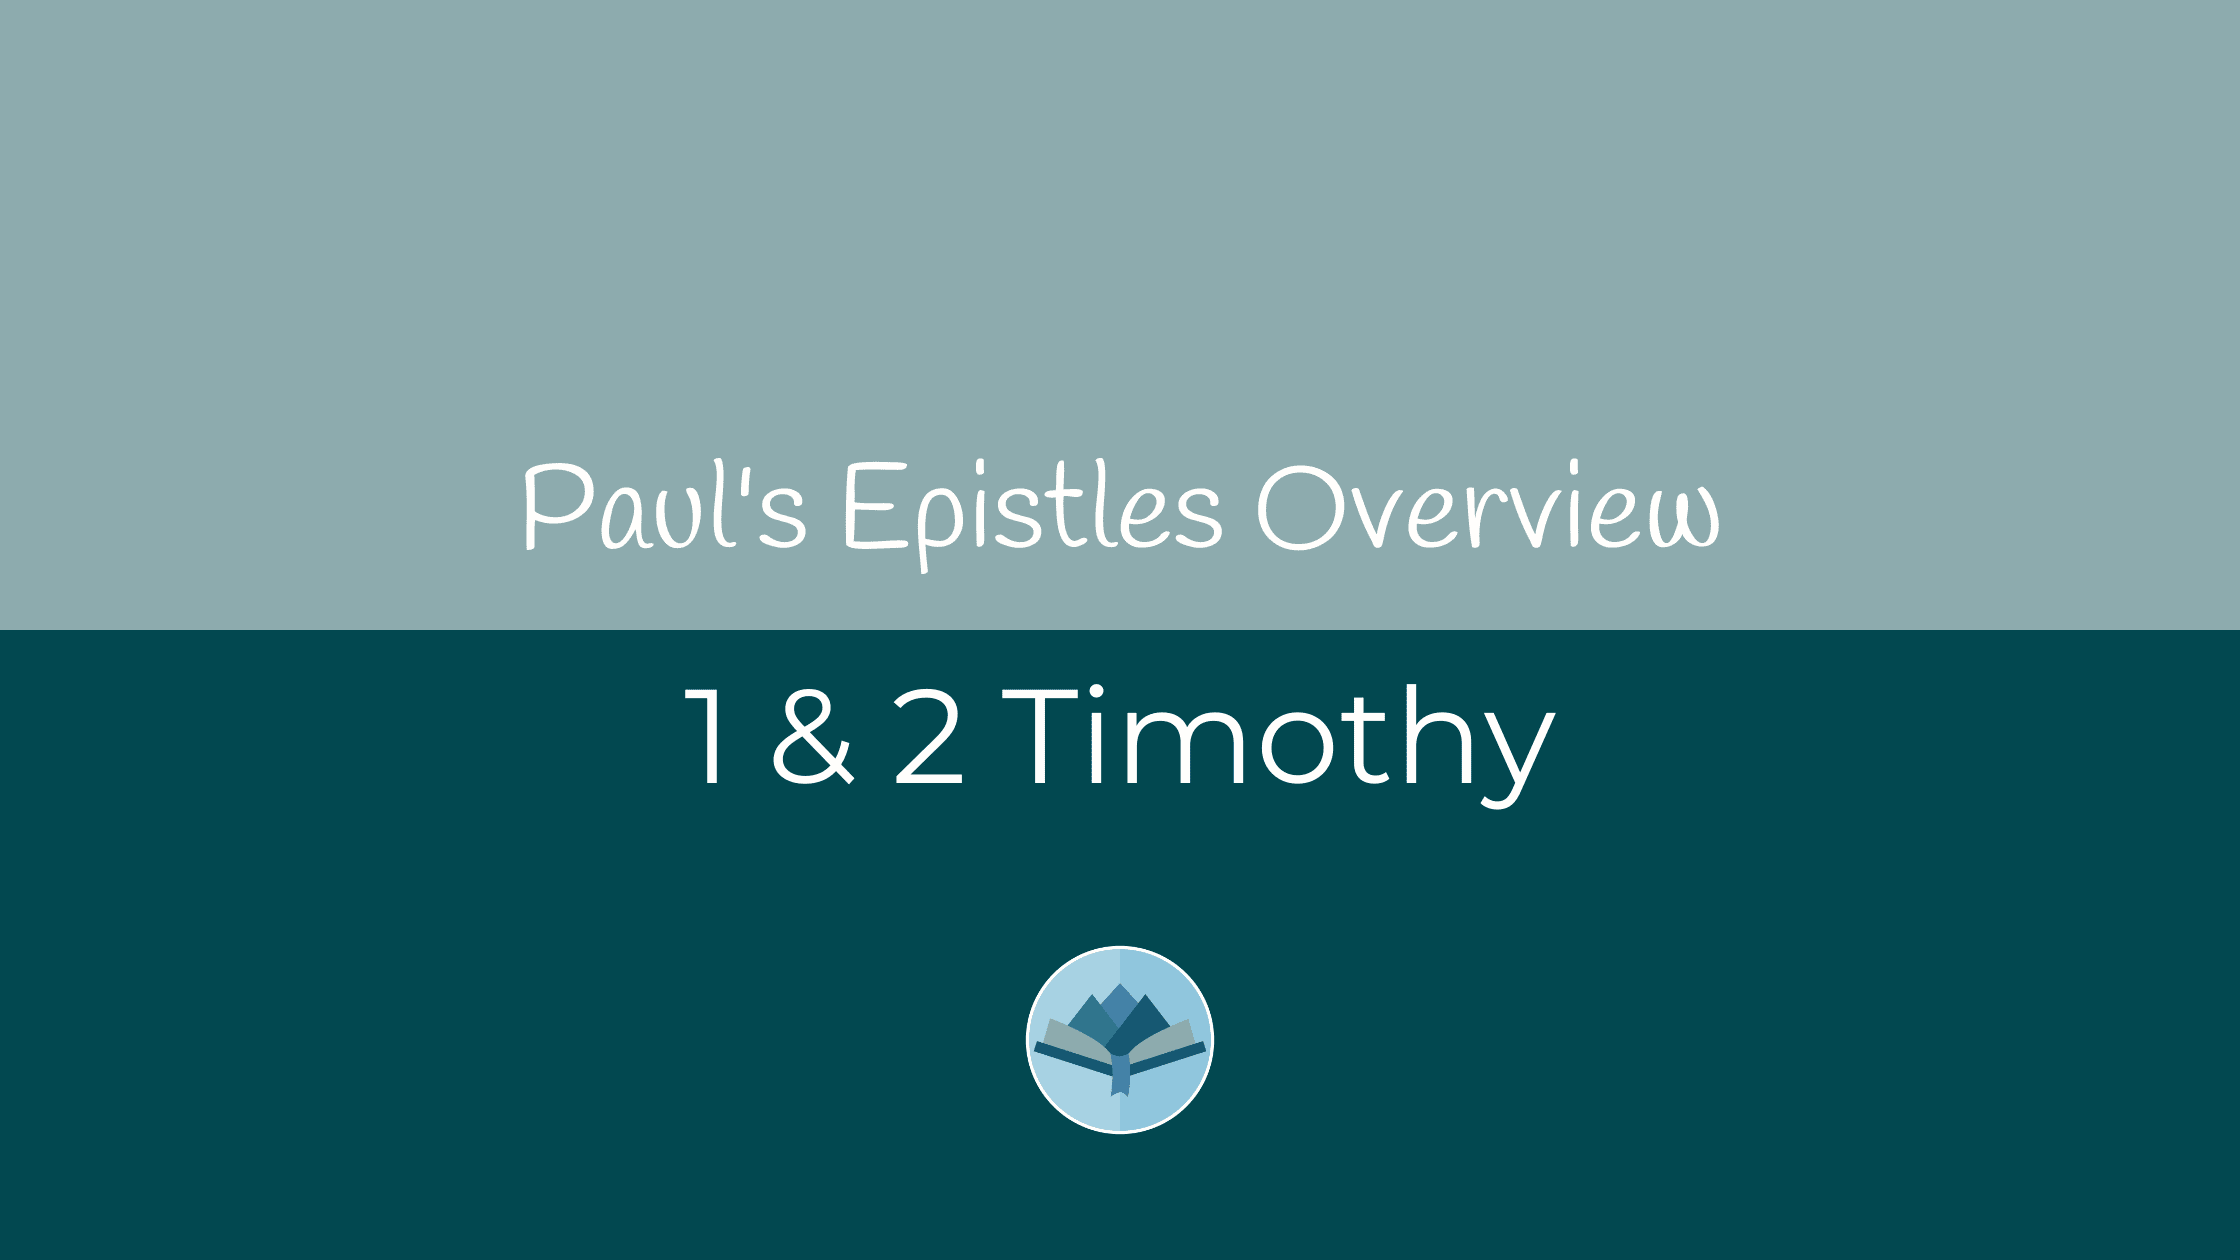 1 & 2 Timothy Overview